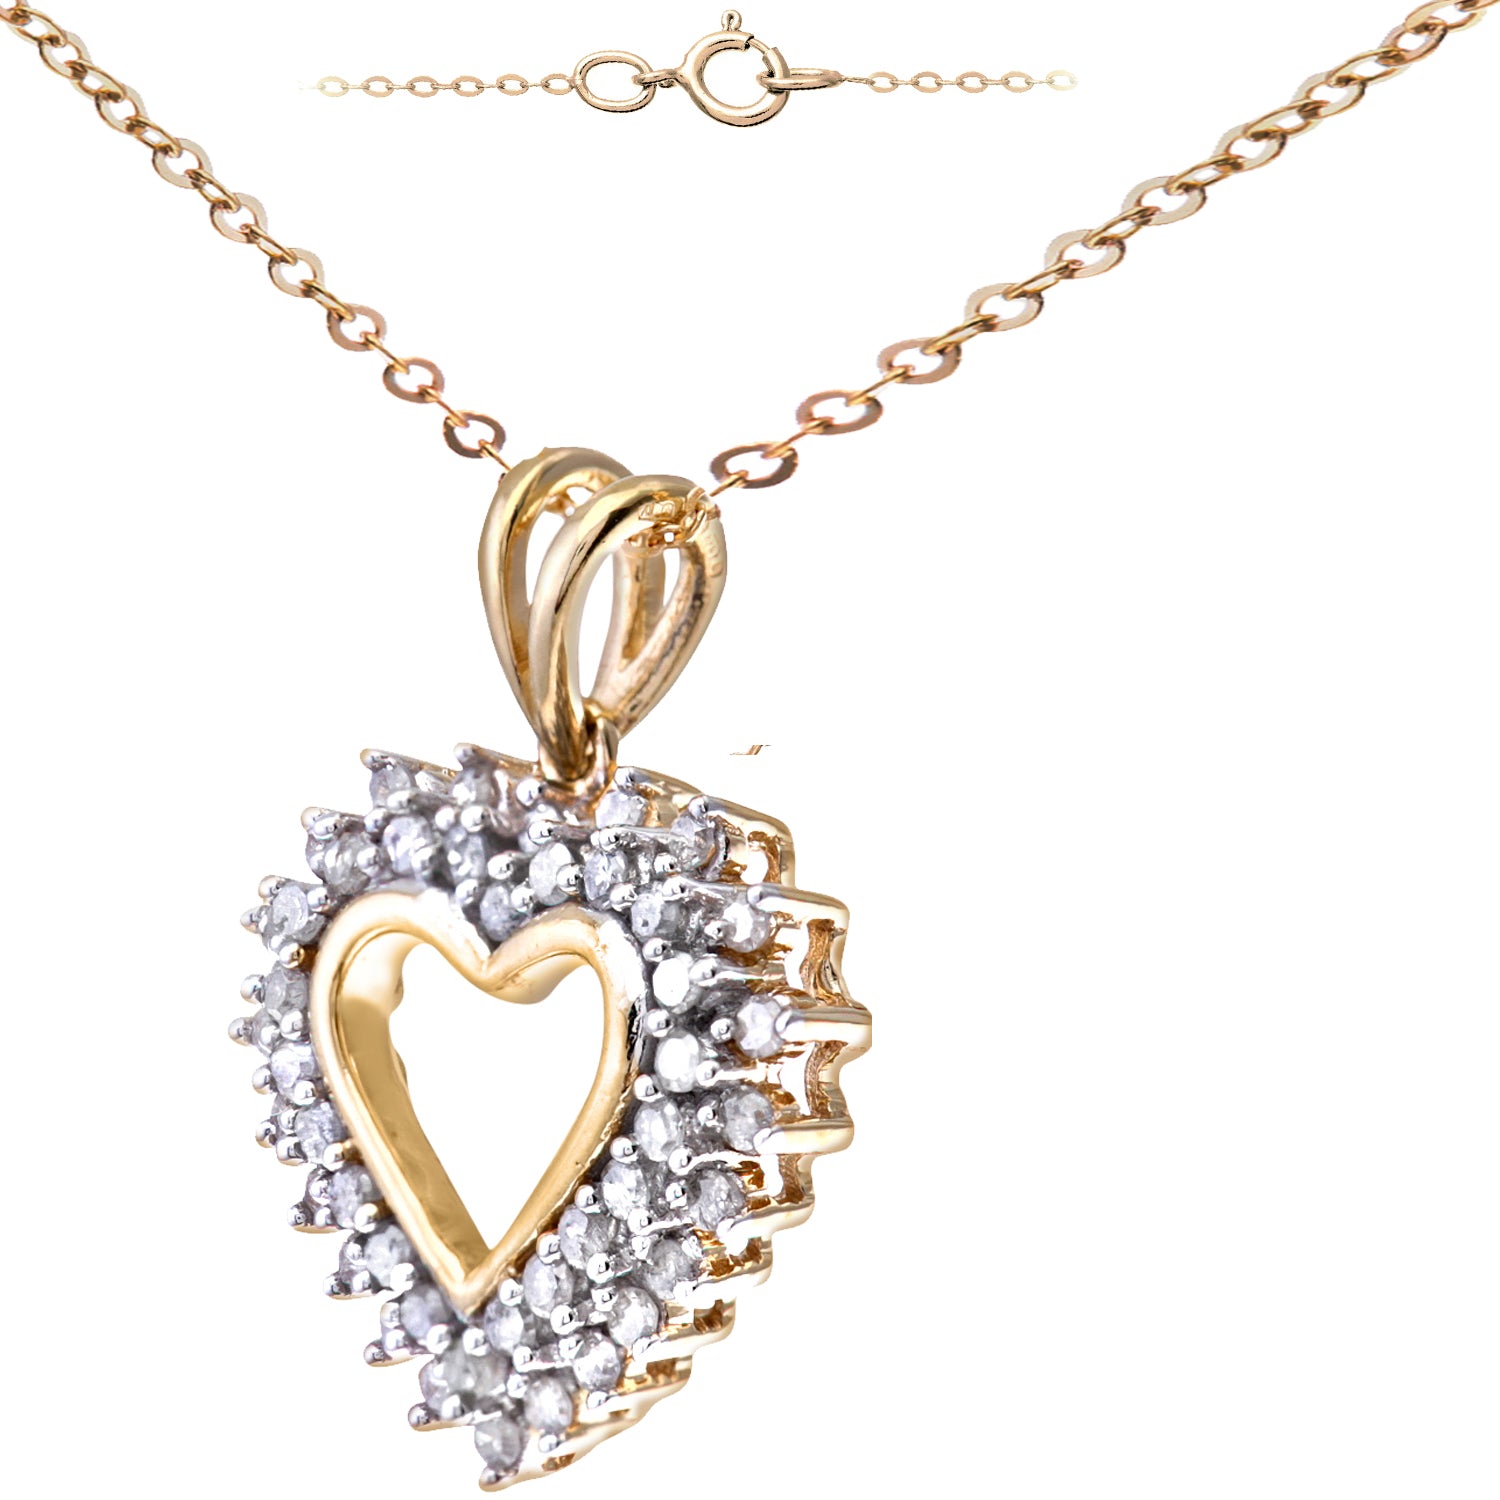 9ct Gold  Round 1/3ct Diamond Heart Pendant Necklace 18 inch - PP0AXL2317Y